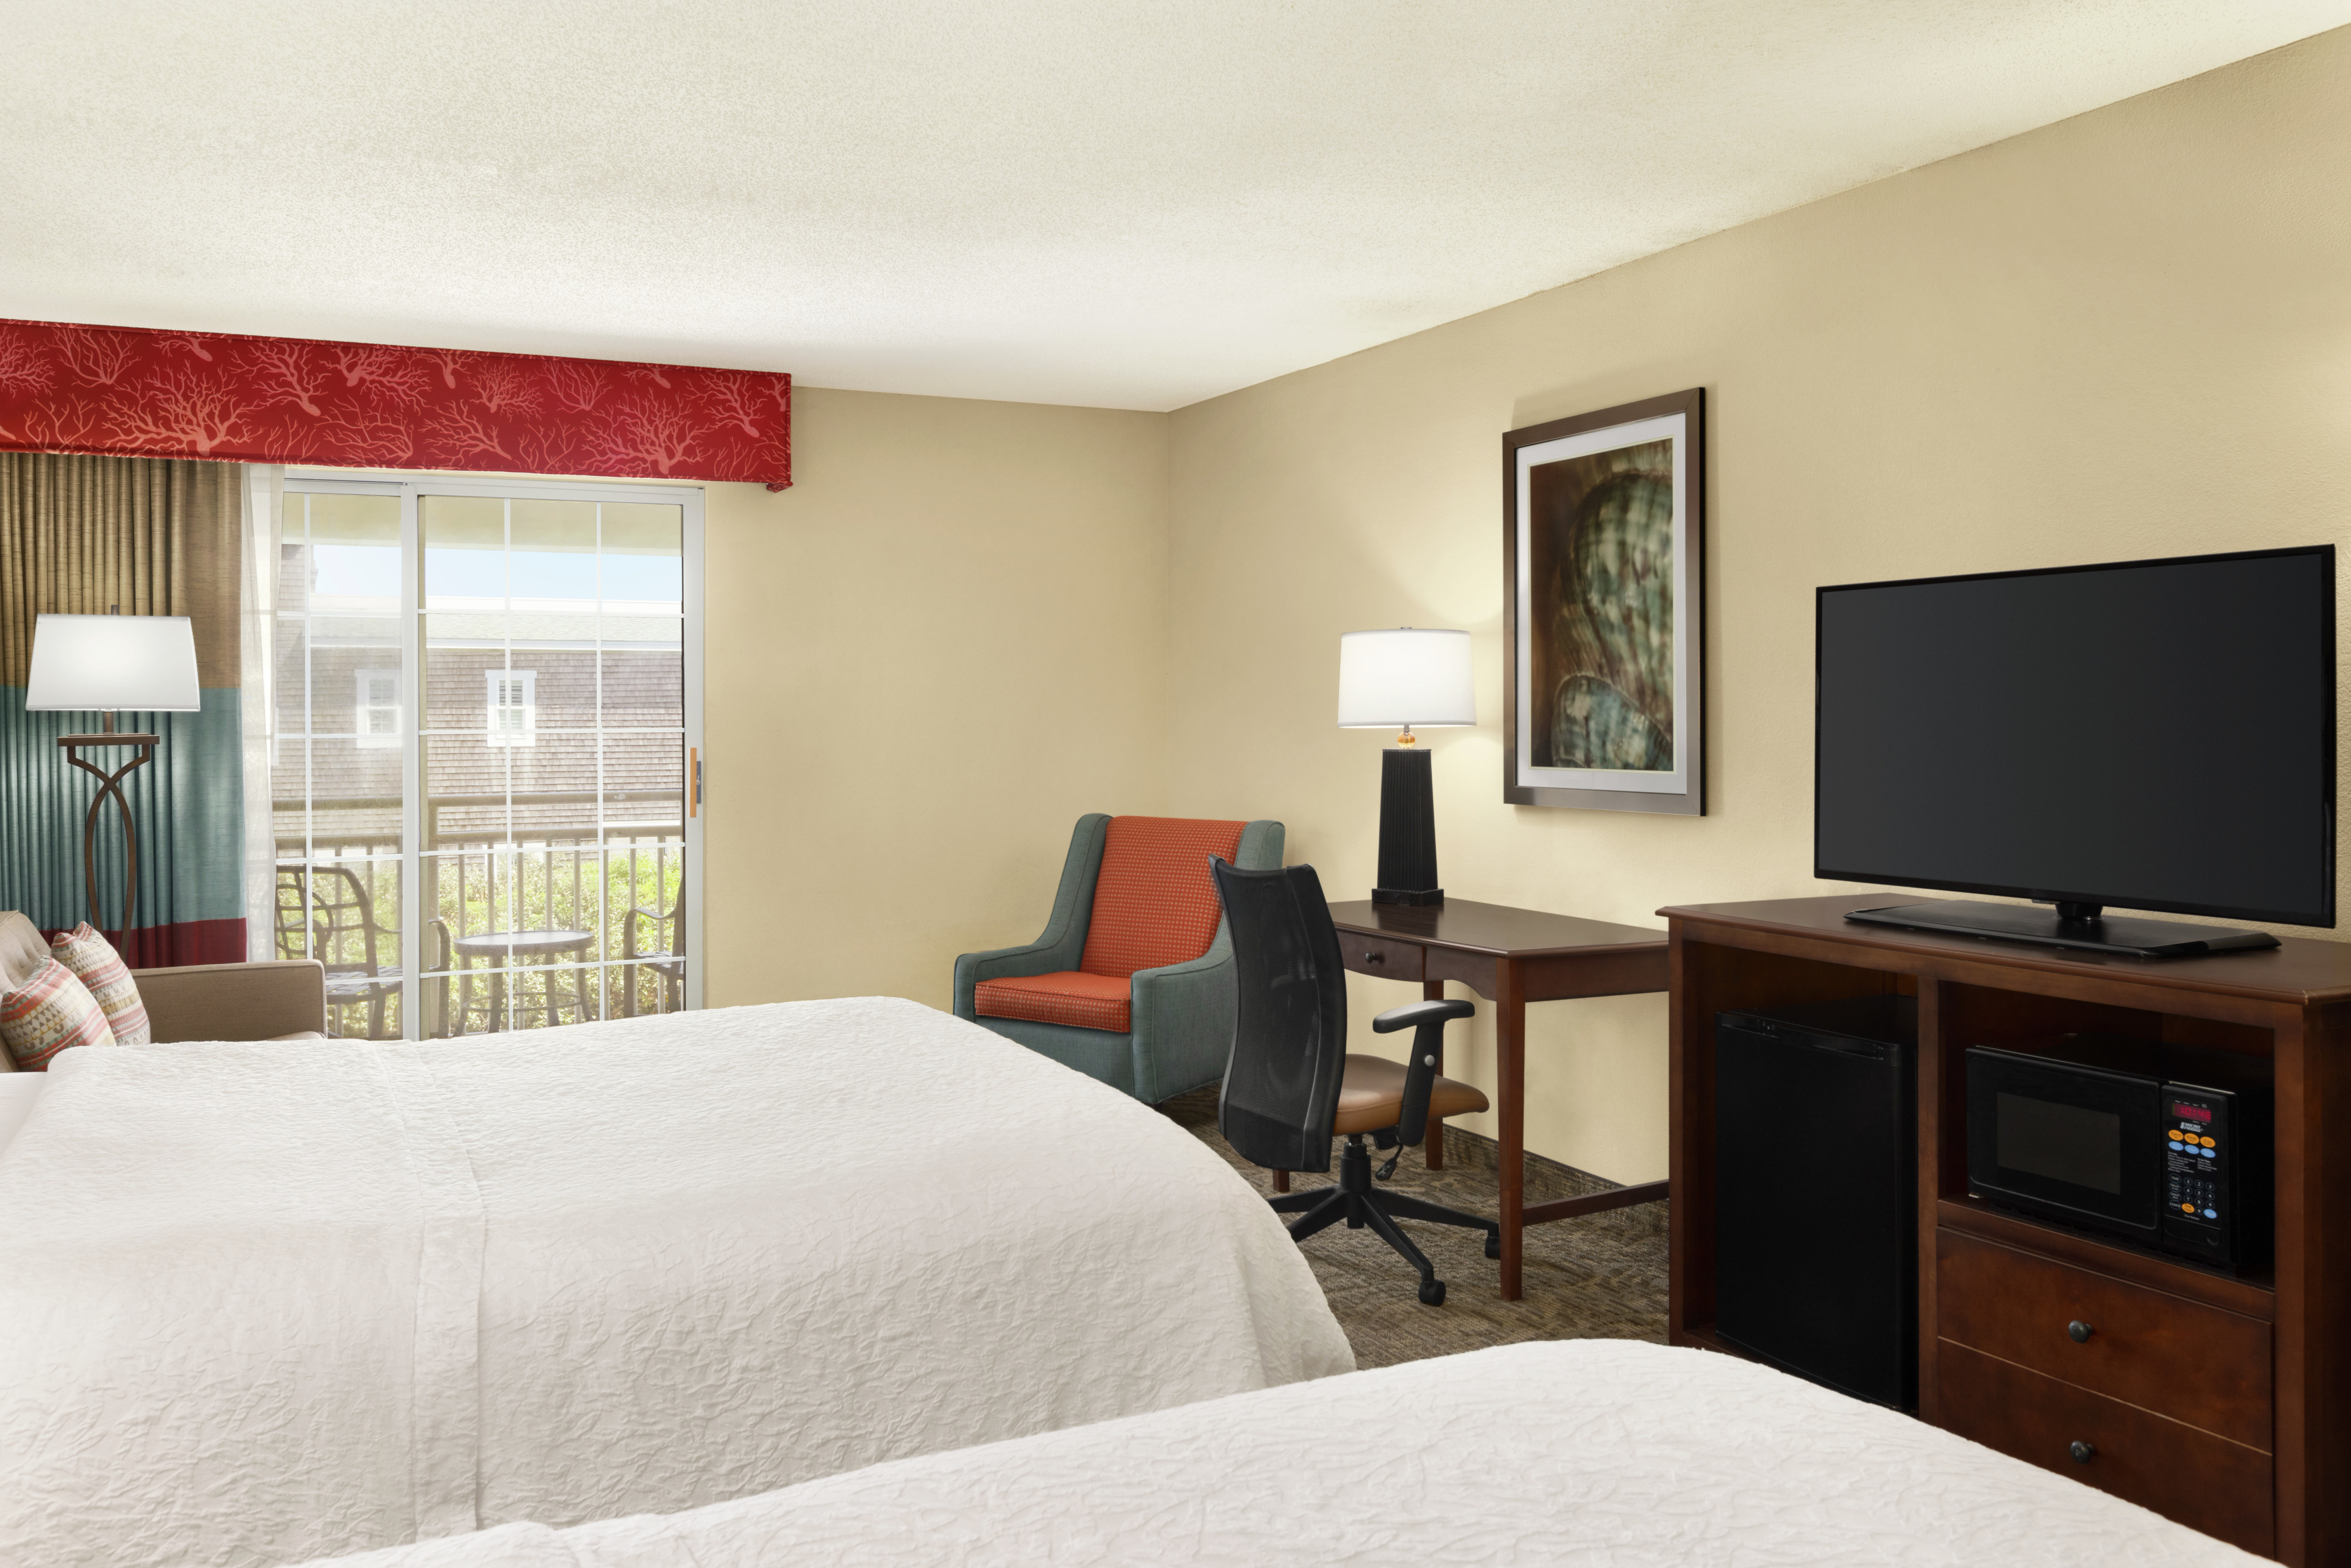 Spacious accessible guestroom featuring work desk, TV, sofa, and private balcony.